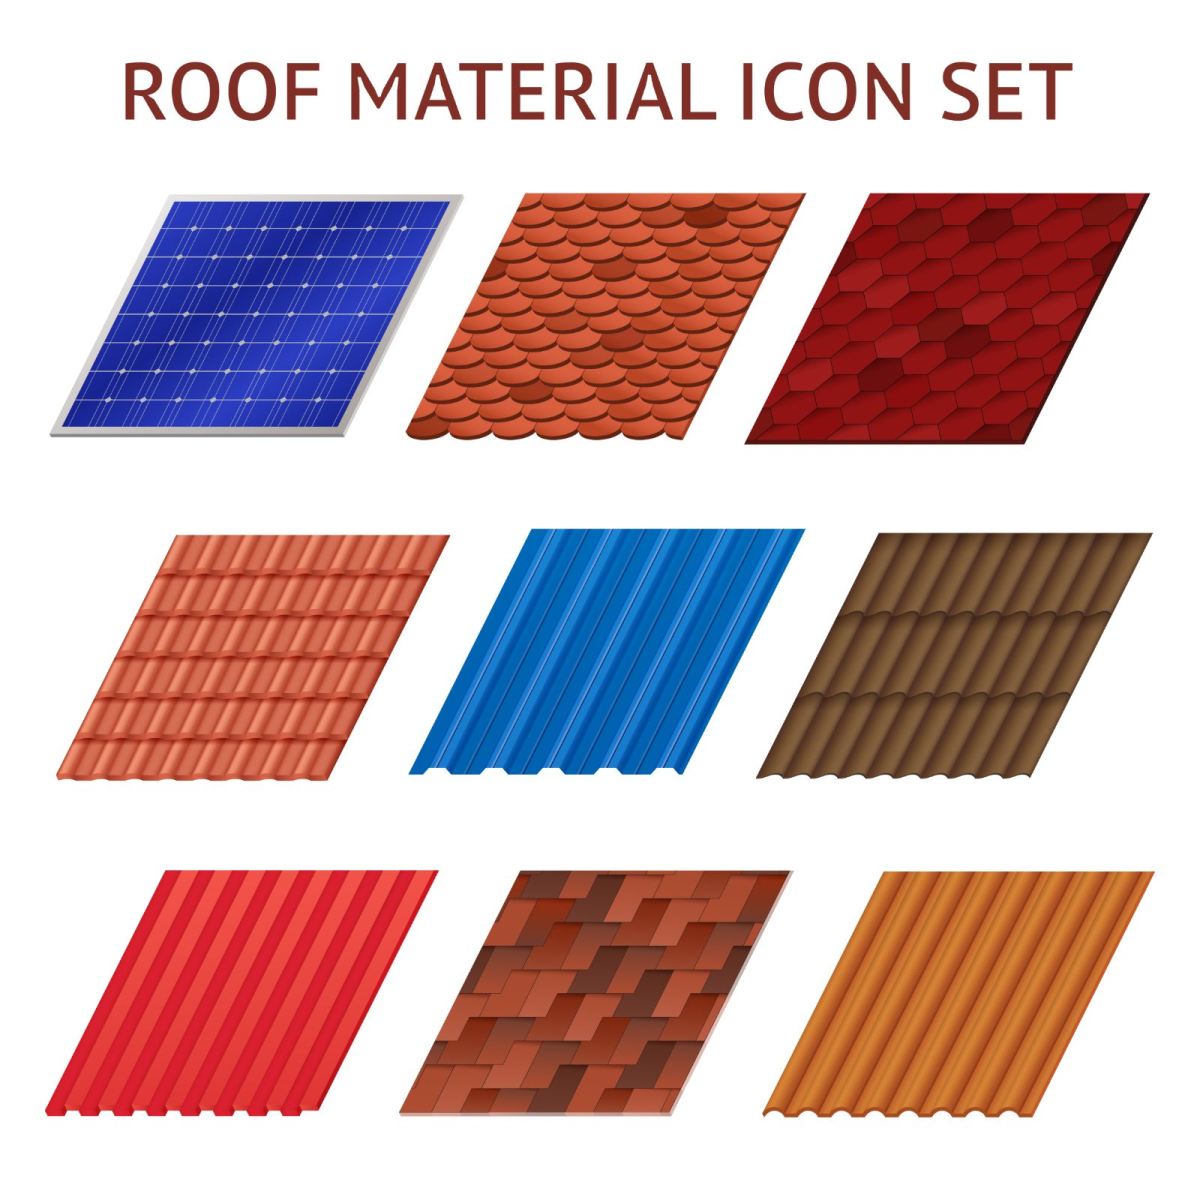 7 Best Types of Roofing In Malaysia